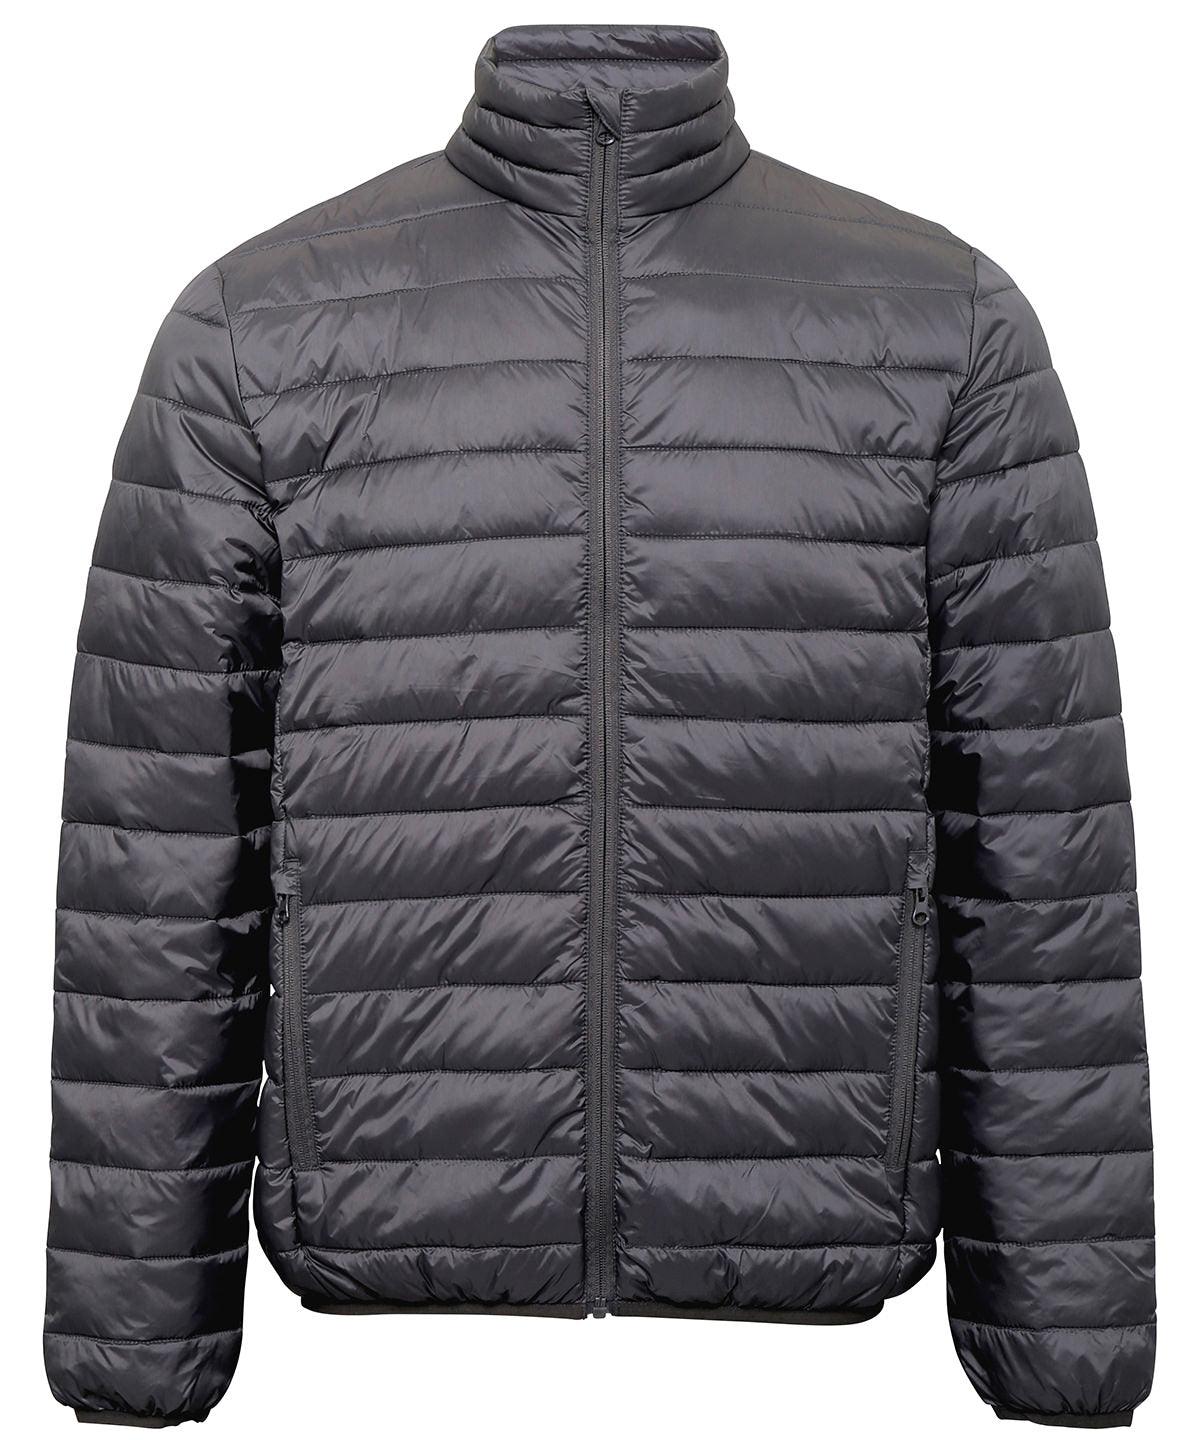 Steel - Terrain padded jacket Jackets 2786 Jackets & Coats, Must Haves, Padded & Insulation, Padded Perfection, Plus Sizes Schoolwear Centres